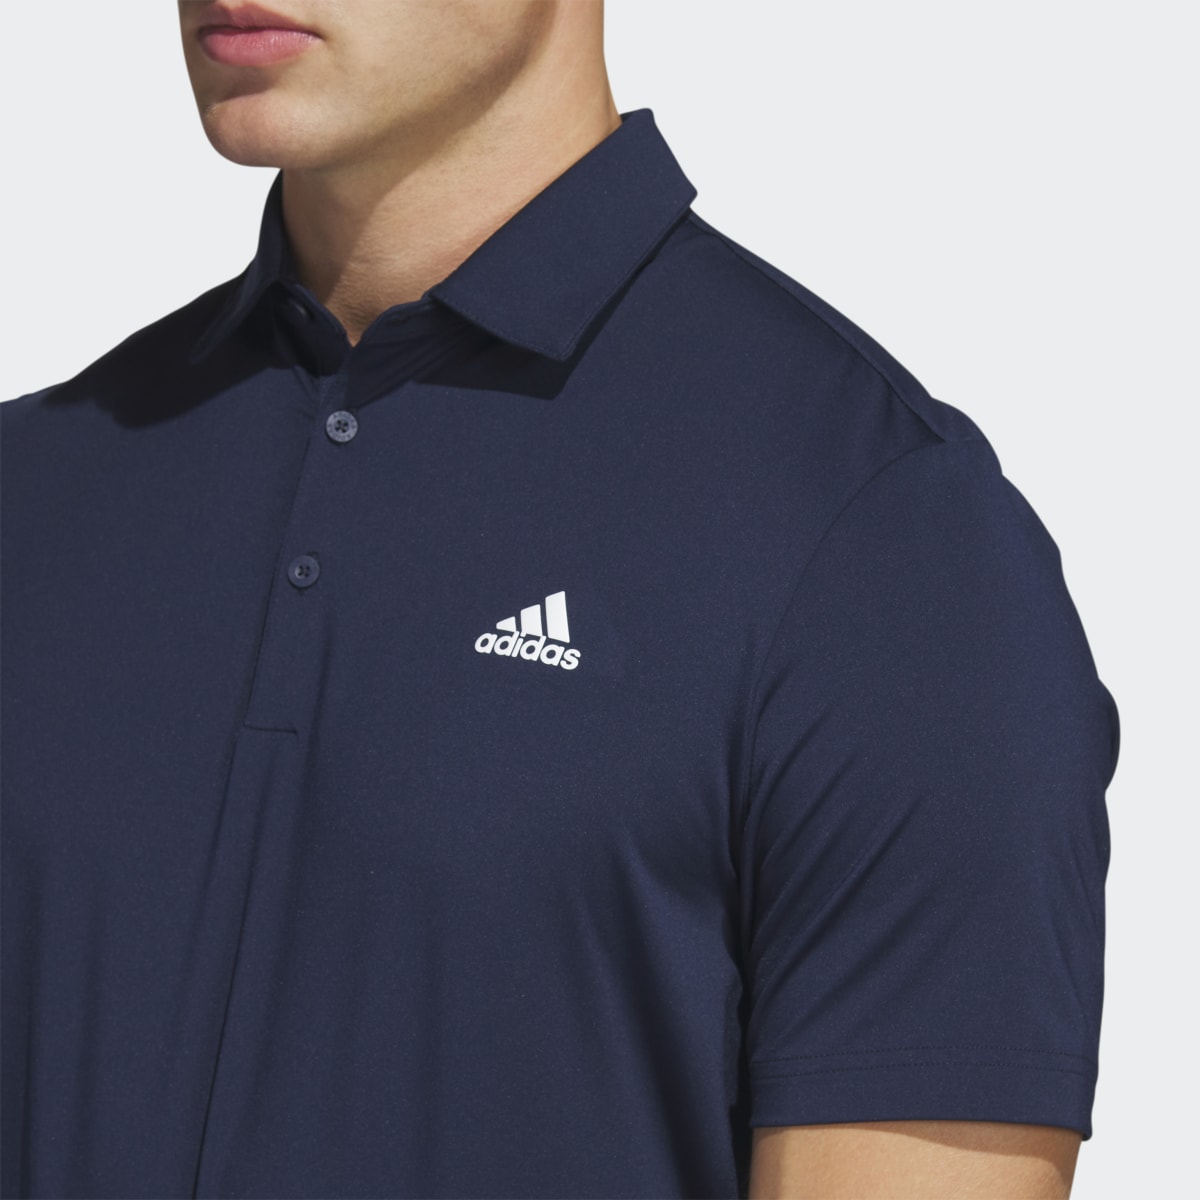 Adidas Polo Ultimate365 Solid Left Chest. 6